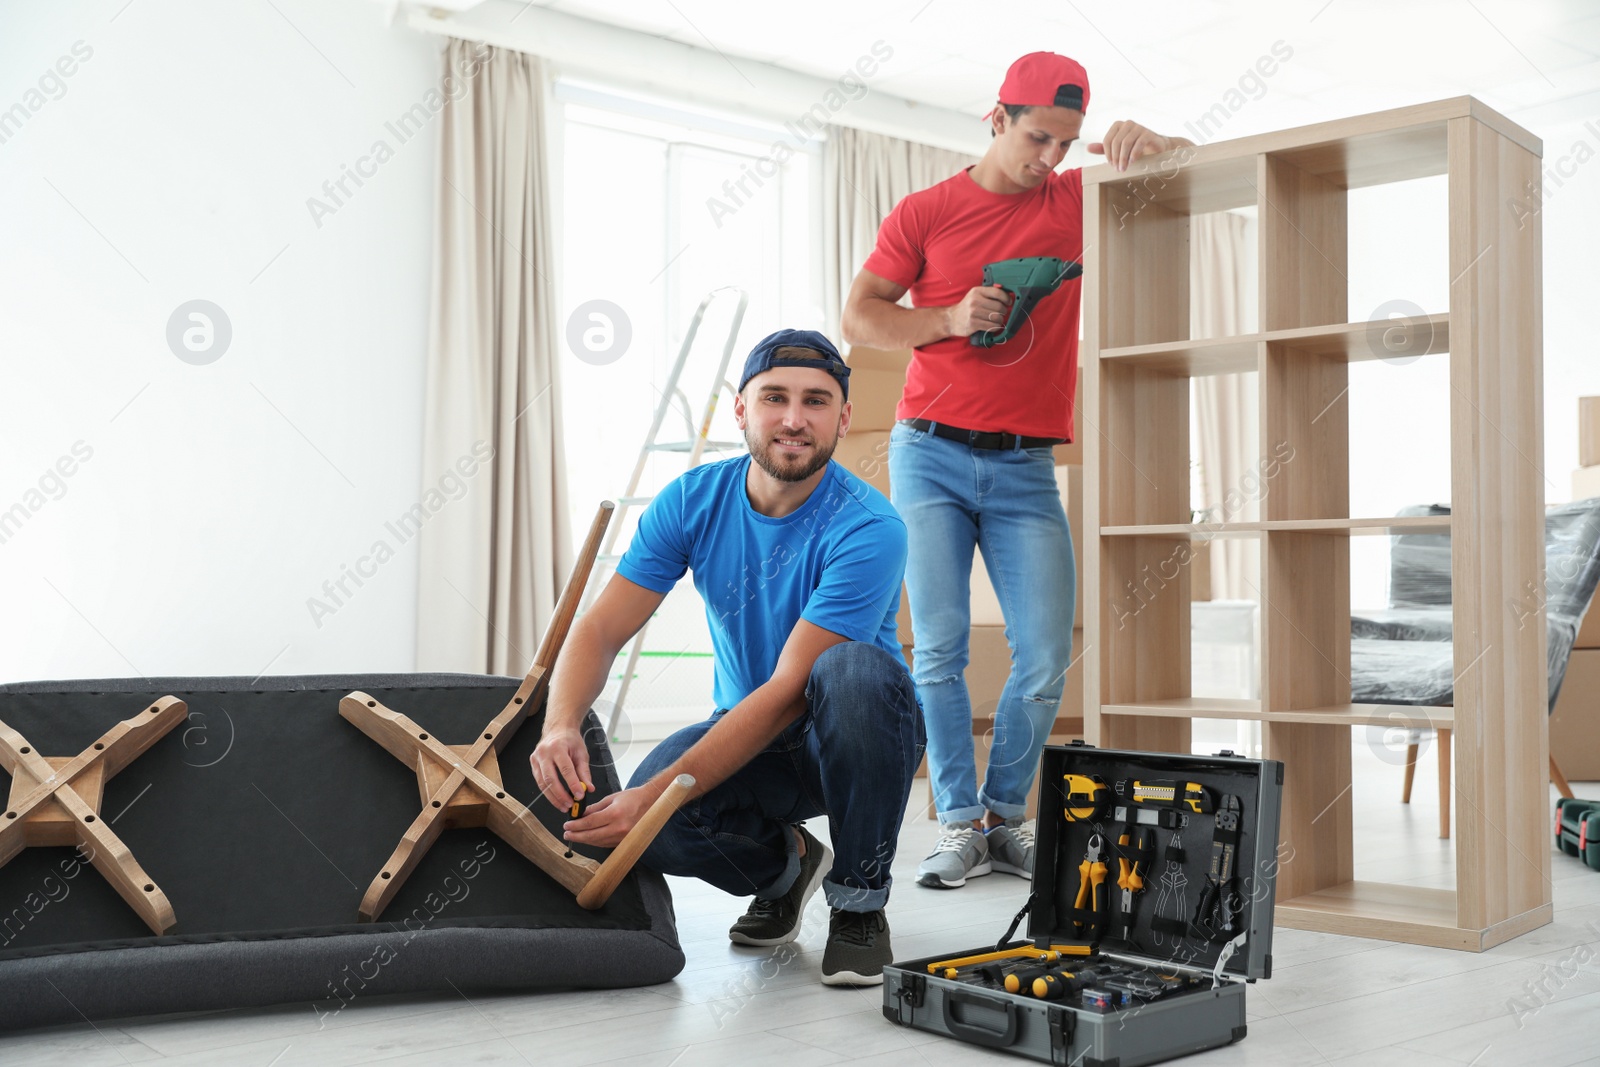 Photo of Male movers assembling furniture in new house